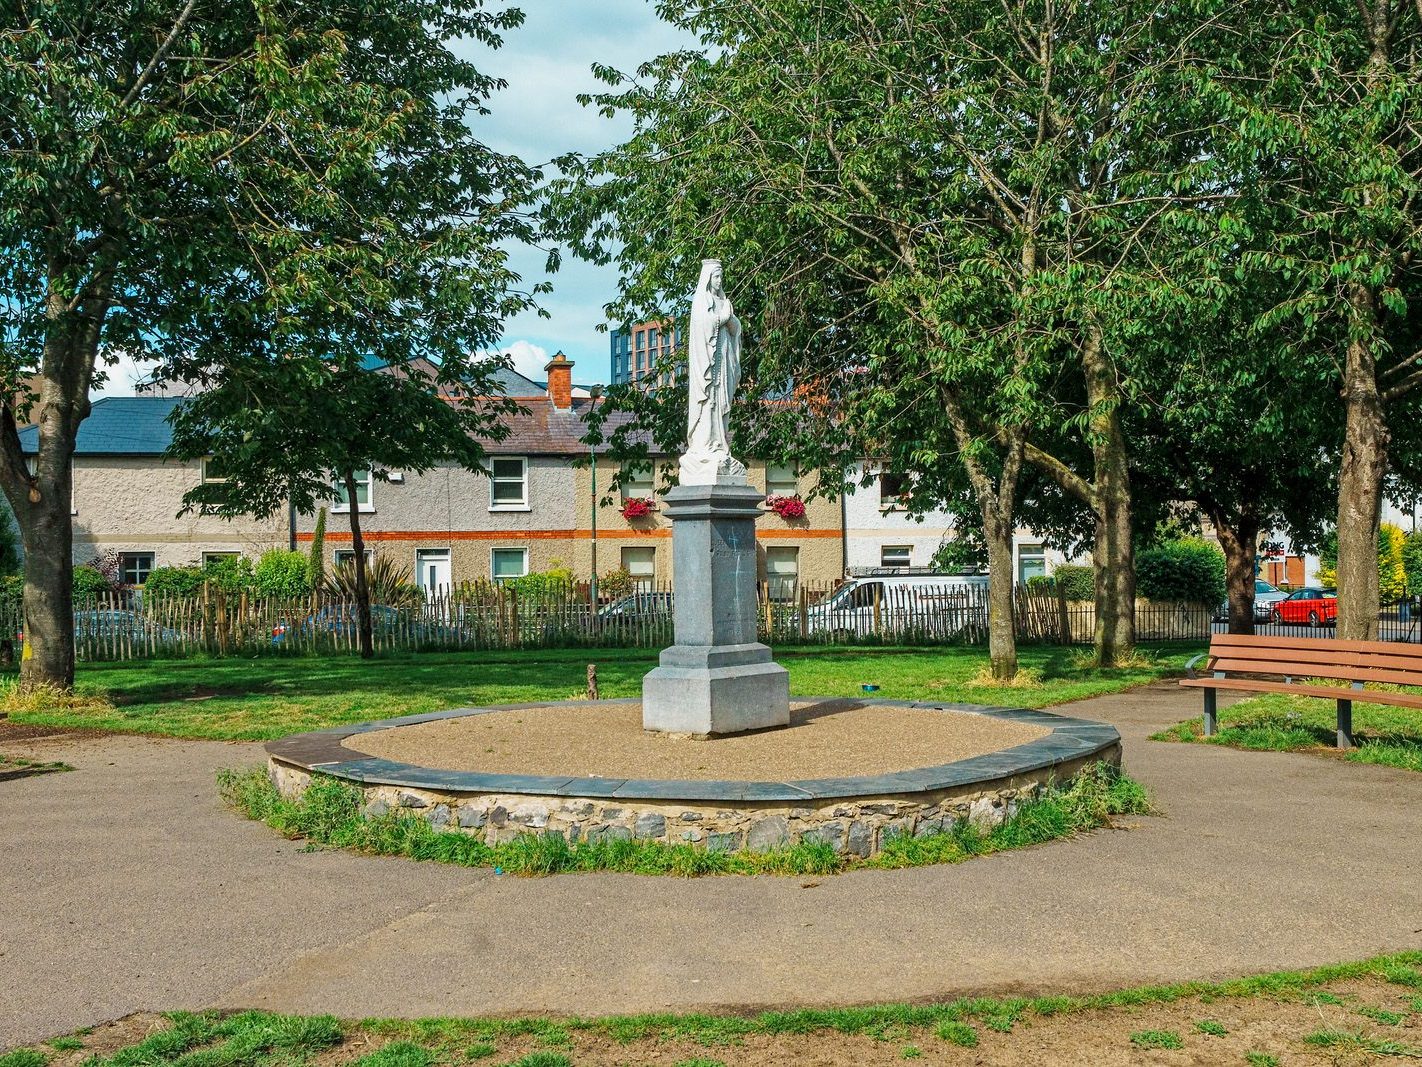 MARIAN STATUE ERECTED IN 1955 RATHER THAN 1955 [OSCAR SQUARE PARK] 003